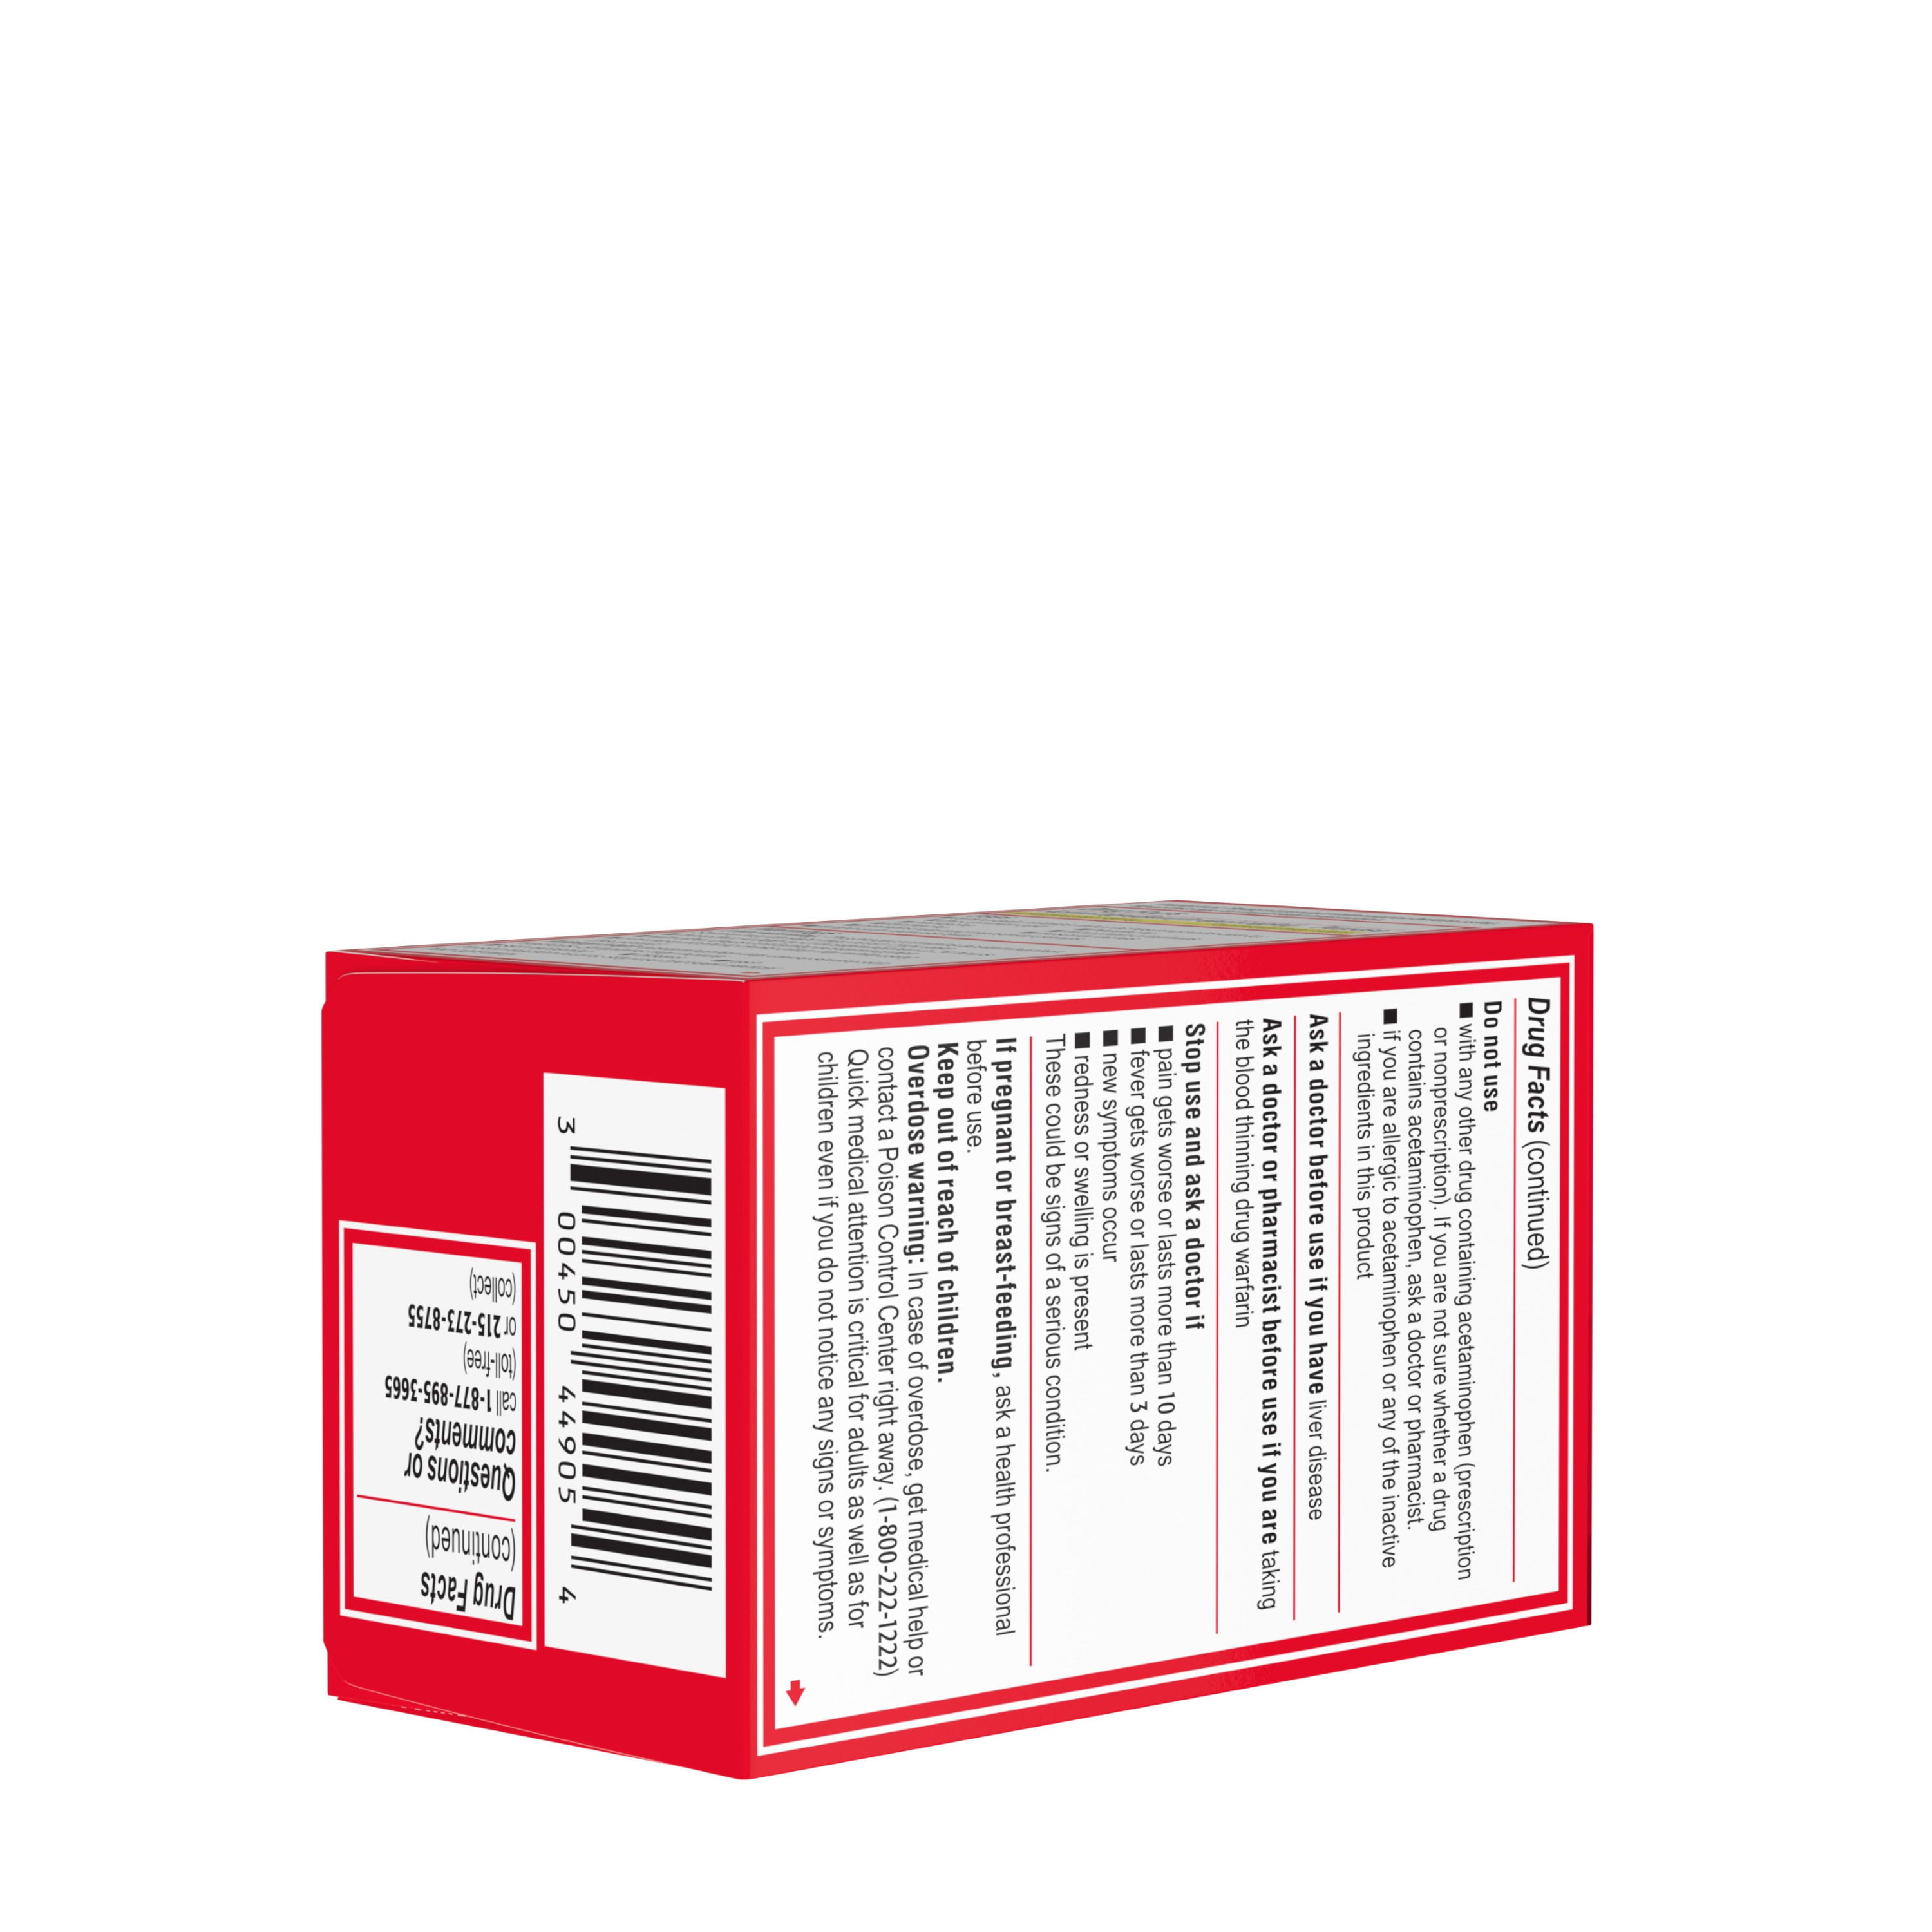 Tylenol Extra Strength Caplets with 24 mg Acetaminophen, 24 ct